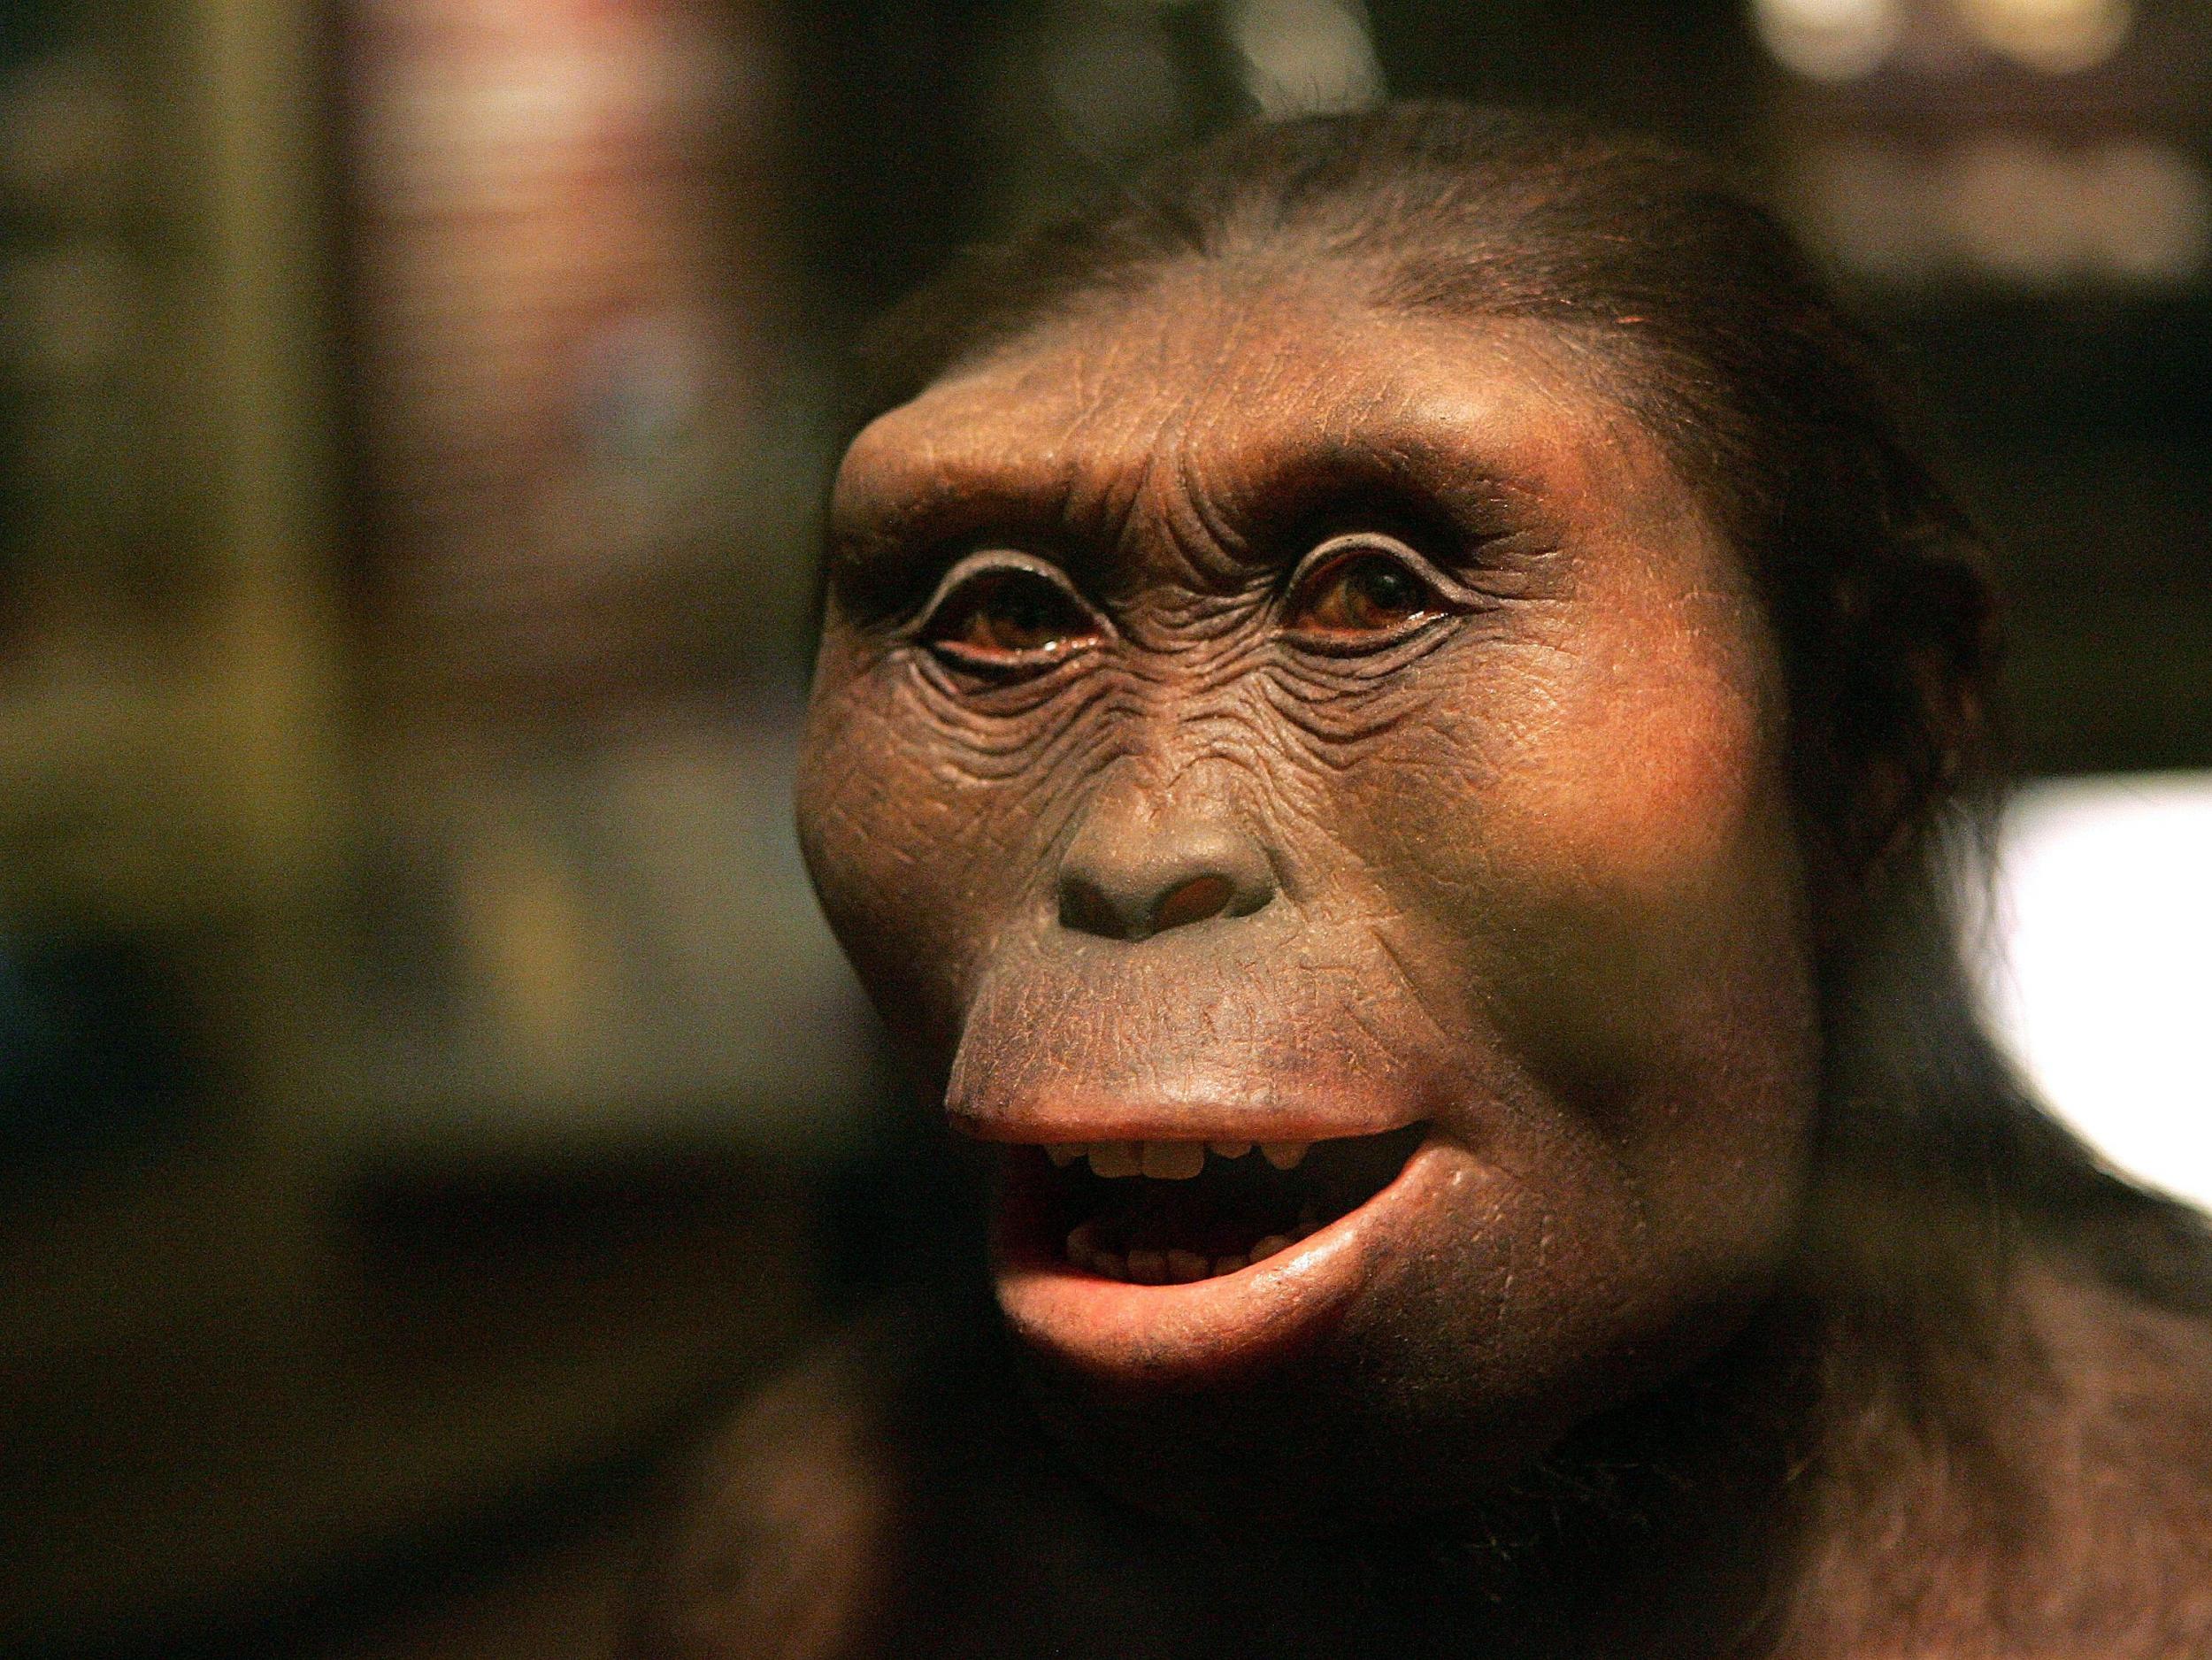 A model of Lucy the Australopithecus at the Field Museum in Chicago